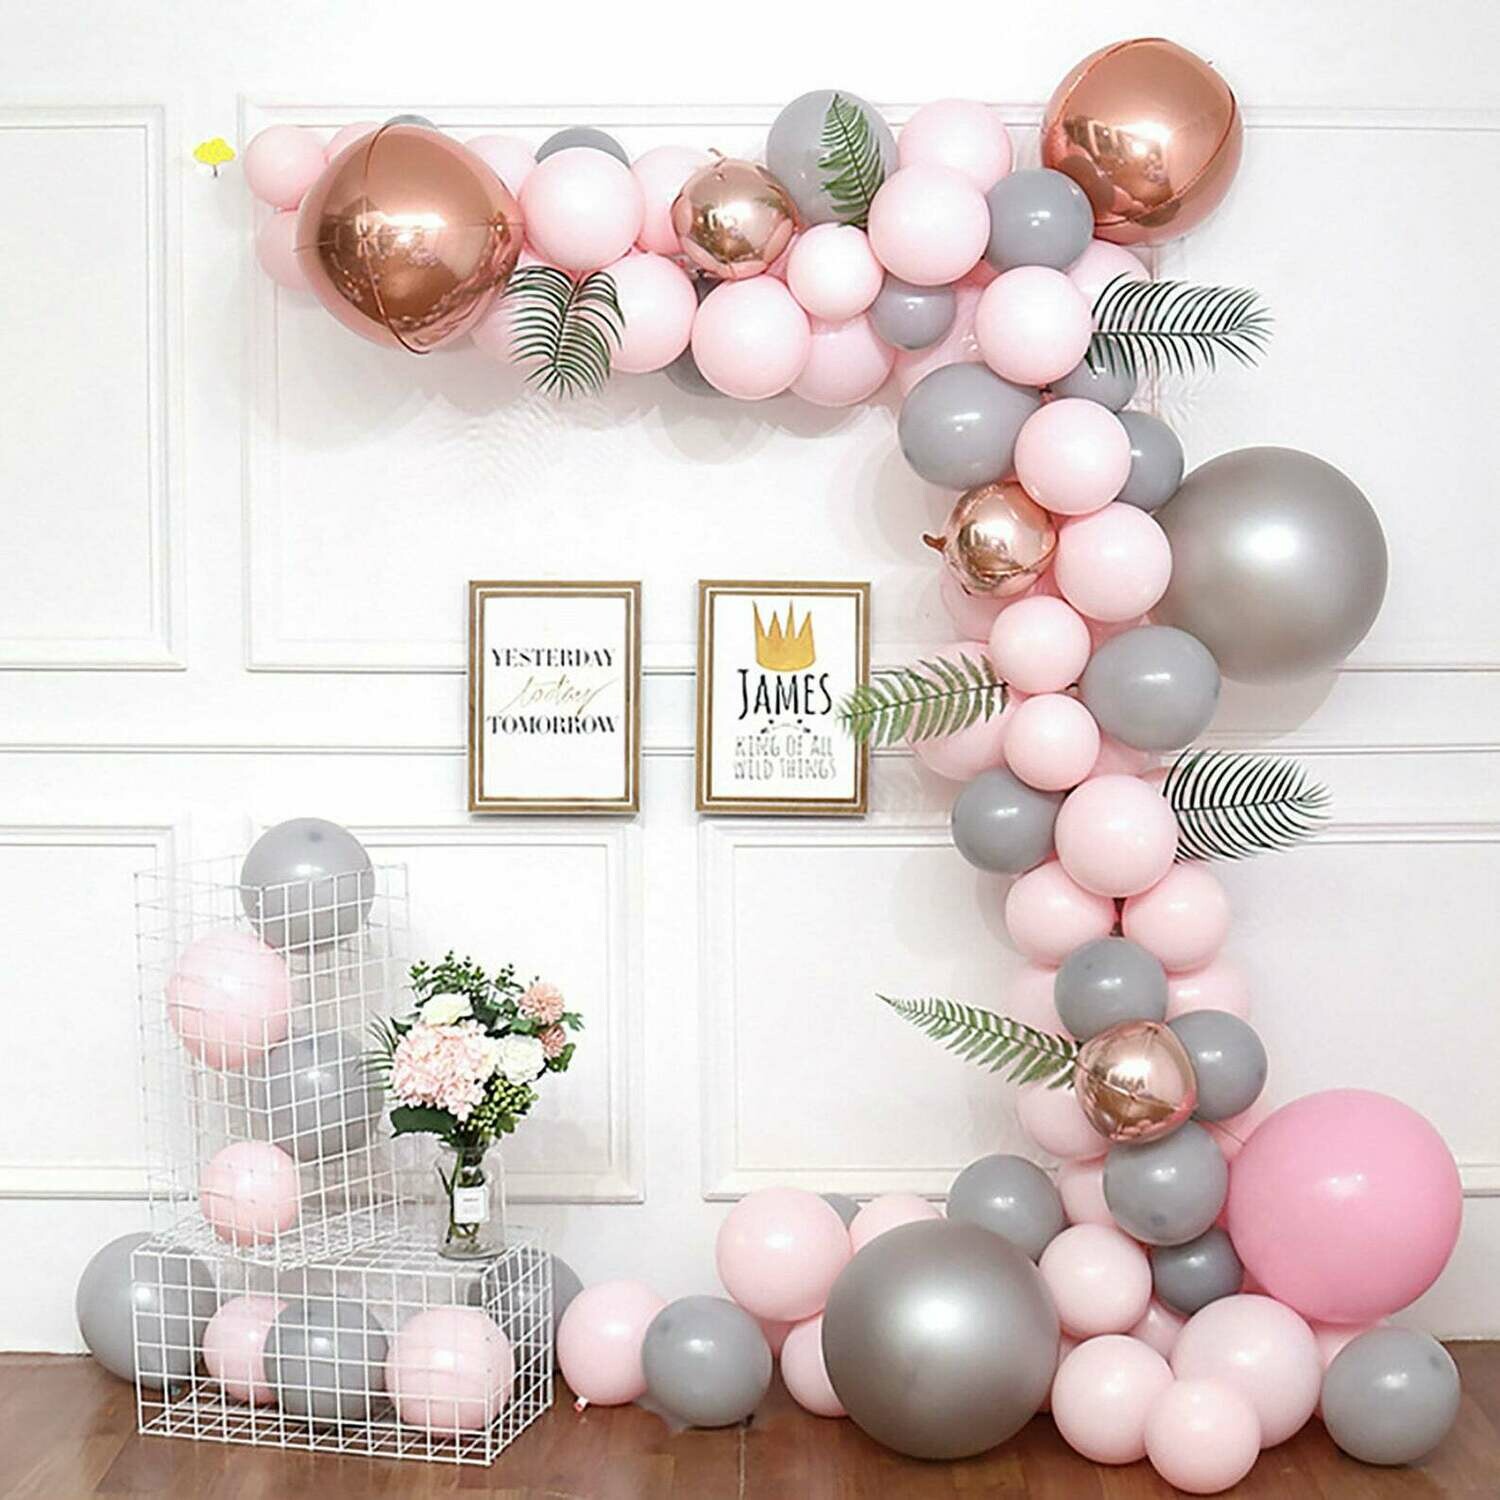 Gray Balloon Garland Kit, Balloon Arch Kit, Party Decor, Birthday Baby Shower Wedding Decoration, Bachelorette Party, Party Supplies